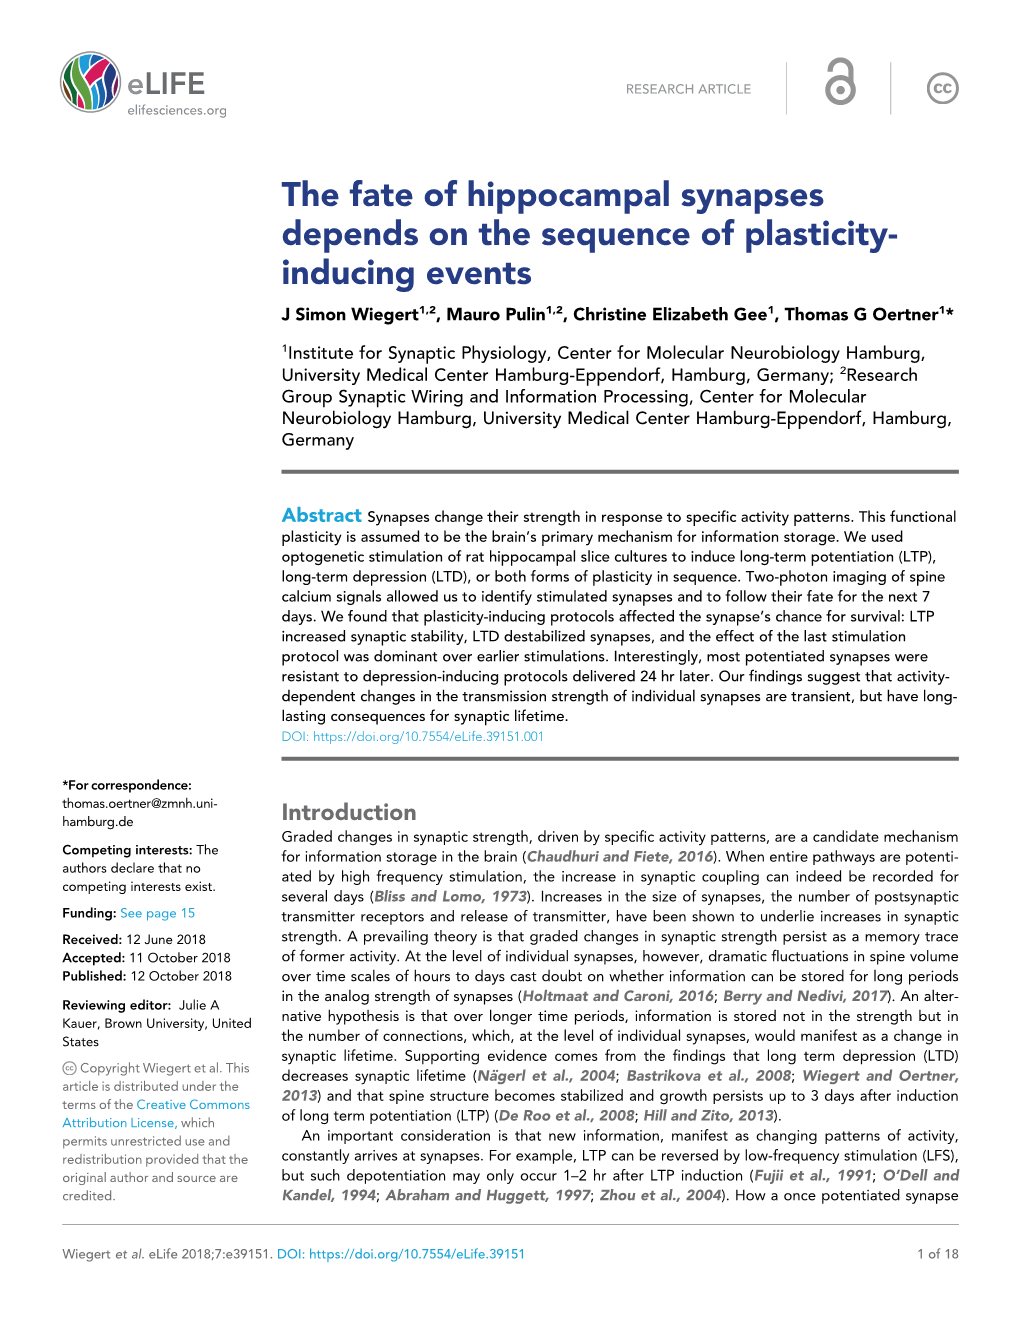 The Fate of Hippocampal Synapses Depends on the Sequence of Plasticity